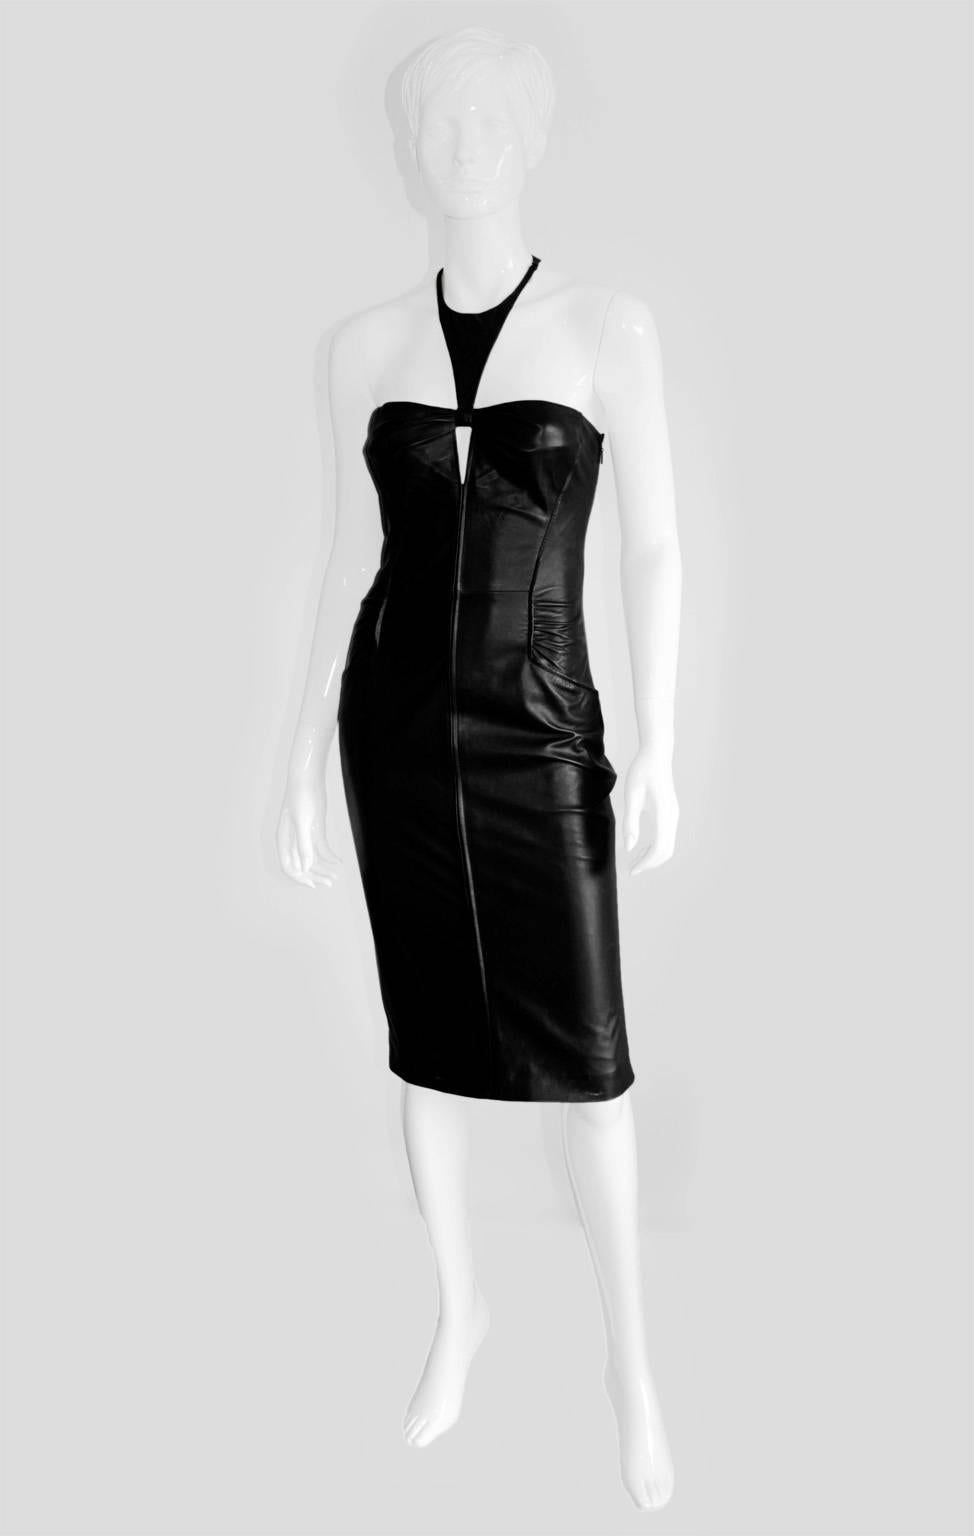 Robin Wright Penn's Gorgeous Tom Ford Gucci Fall Winter 2004 Dress In Black Leather!

Remember that gorgeous white jersey dress we all fell in love with back in FW 2004 when Robin Wright Penn wore it? Well this is that very same dress, but in